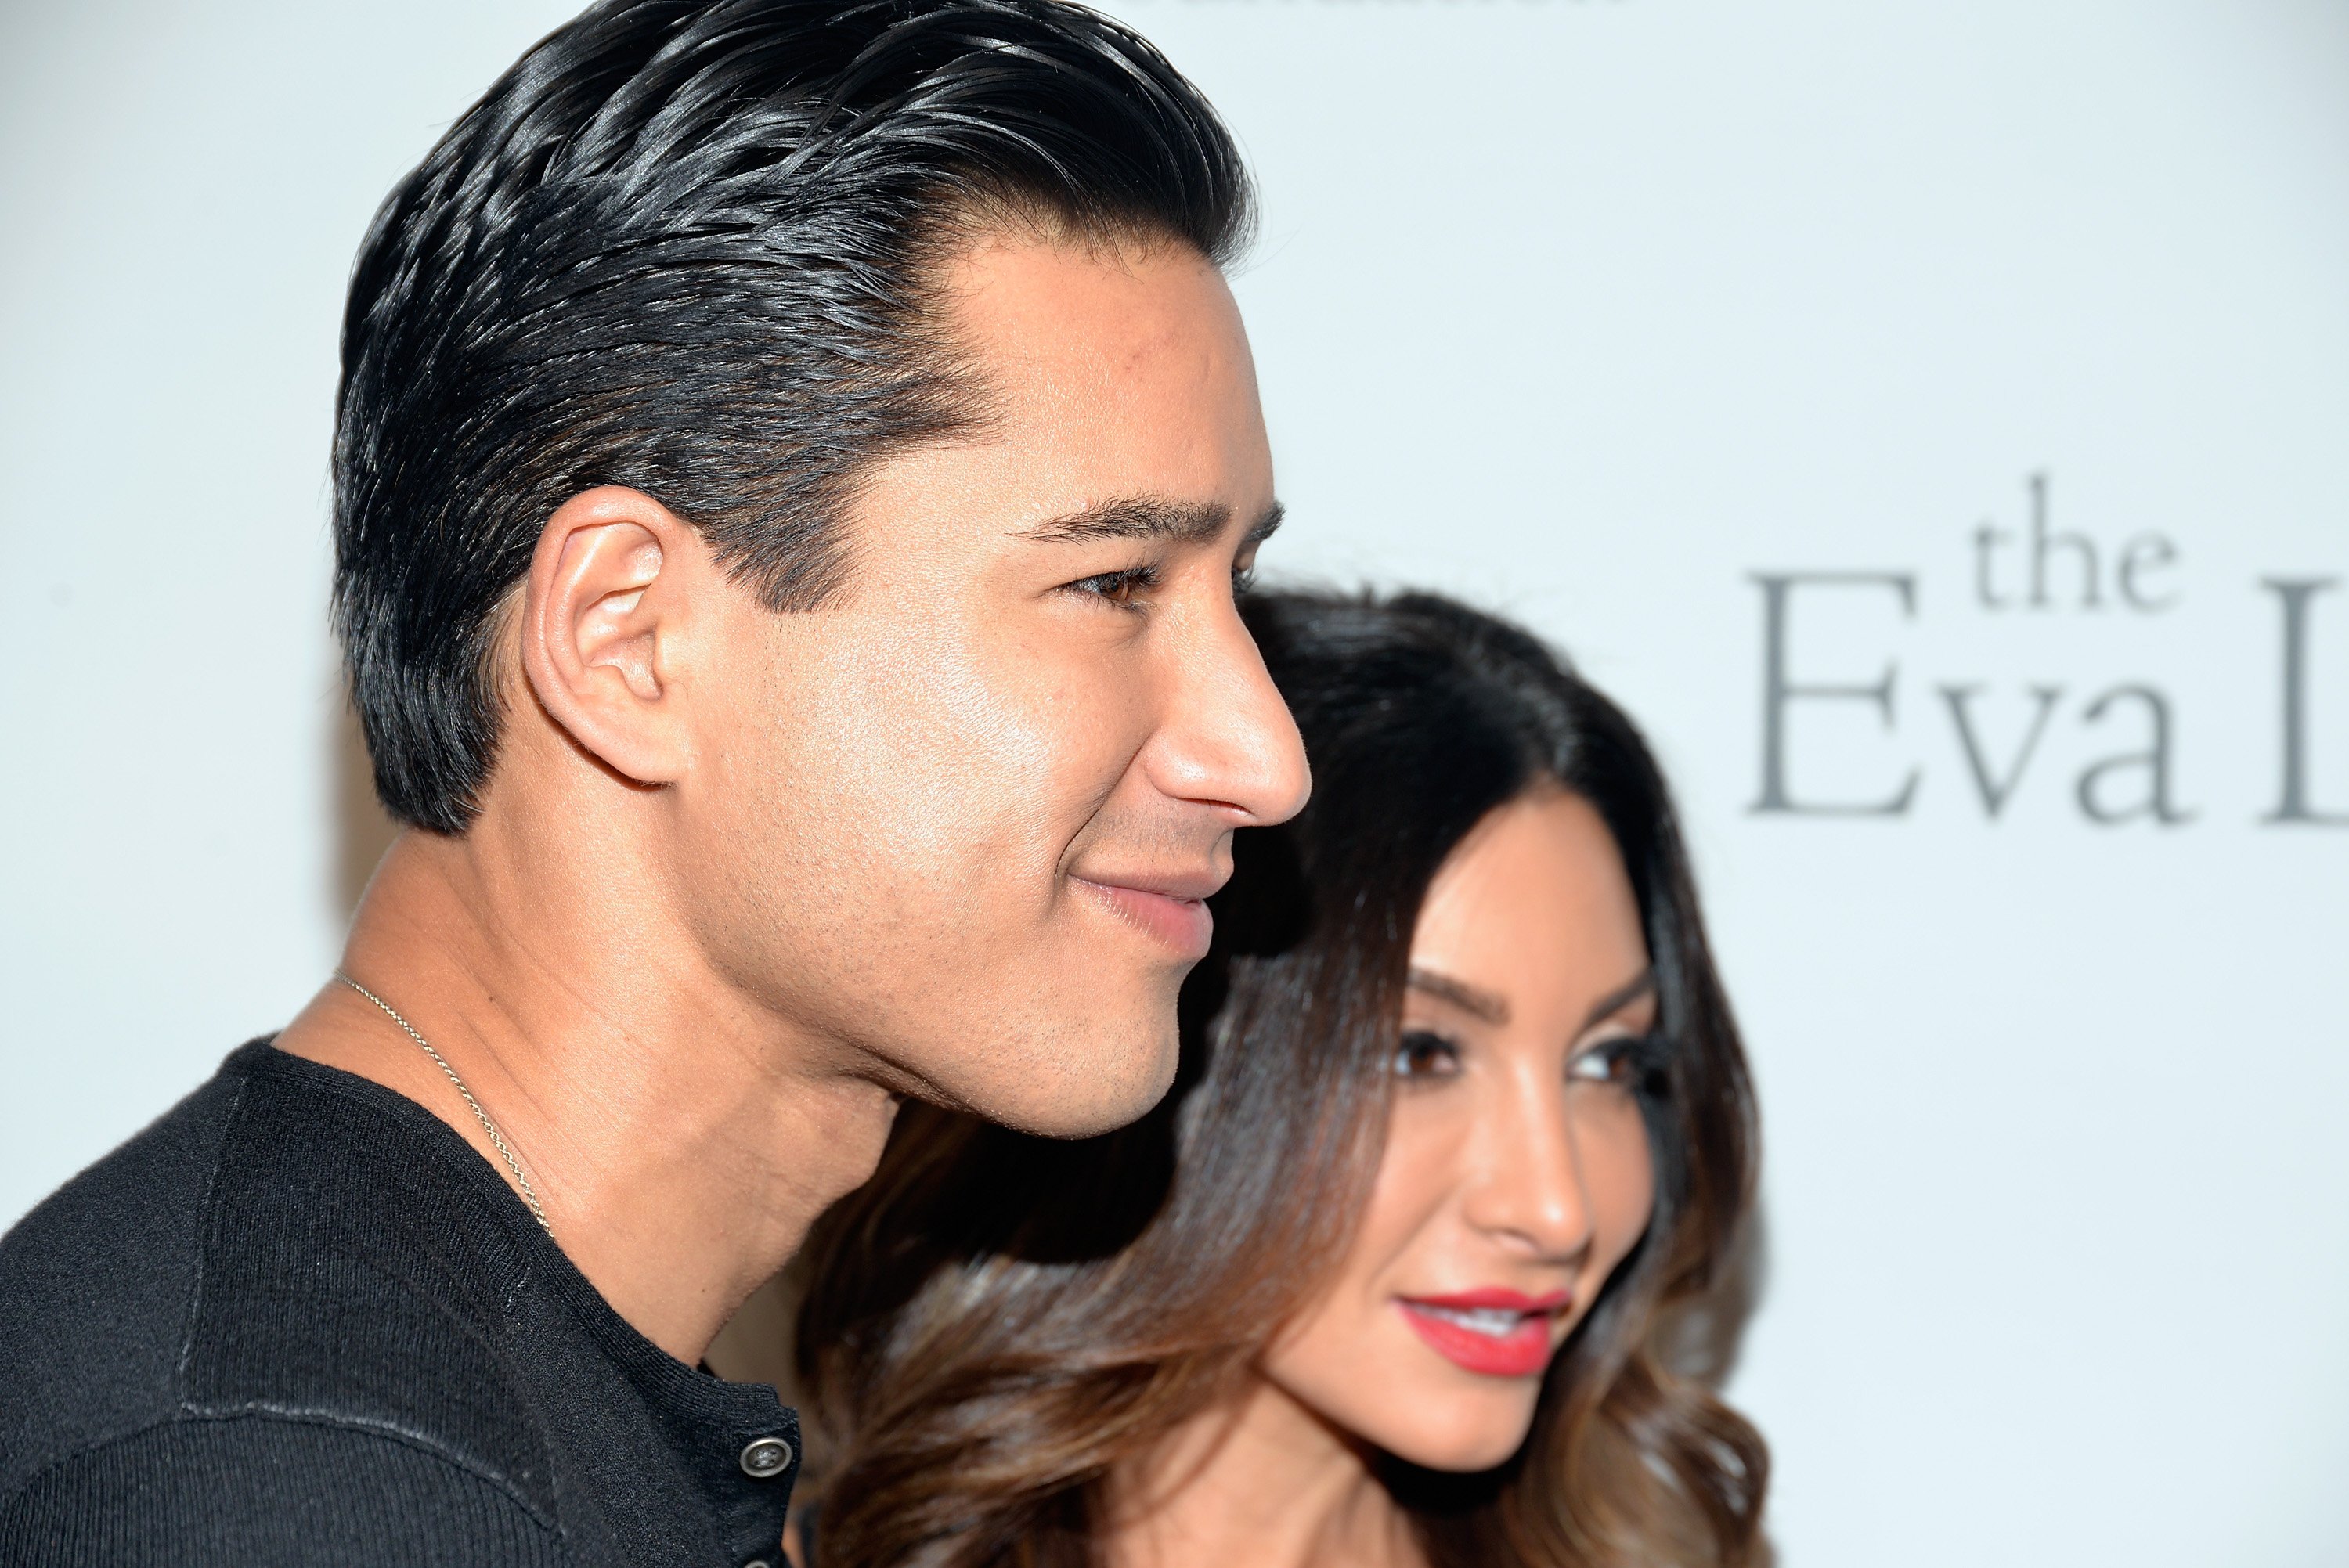 Mario Lopez and Courtney Mazza attend the Eva Longoria Foundation's Annual Dinner gala at Beso on November 5, 2015 